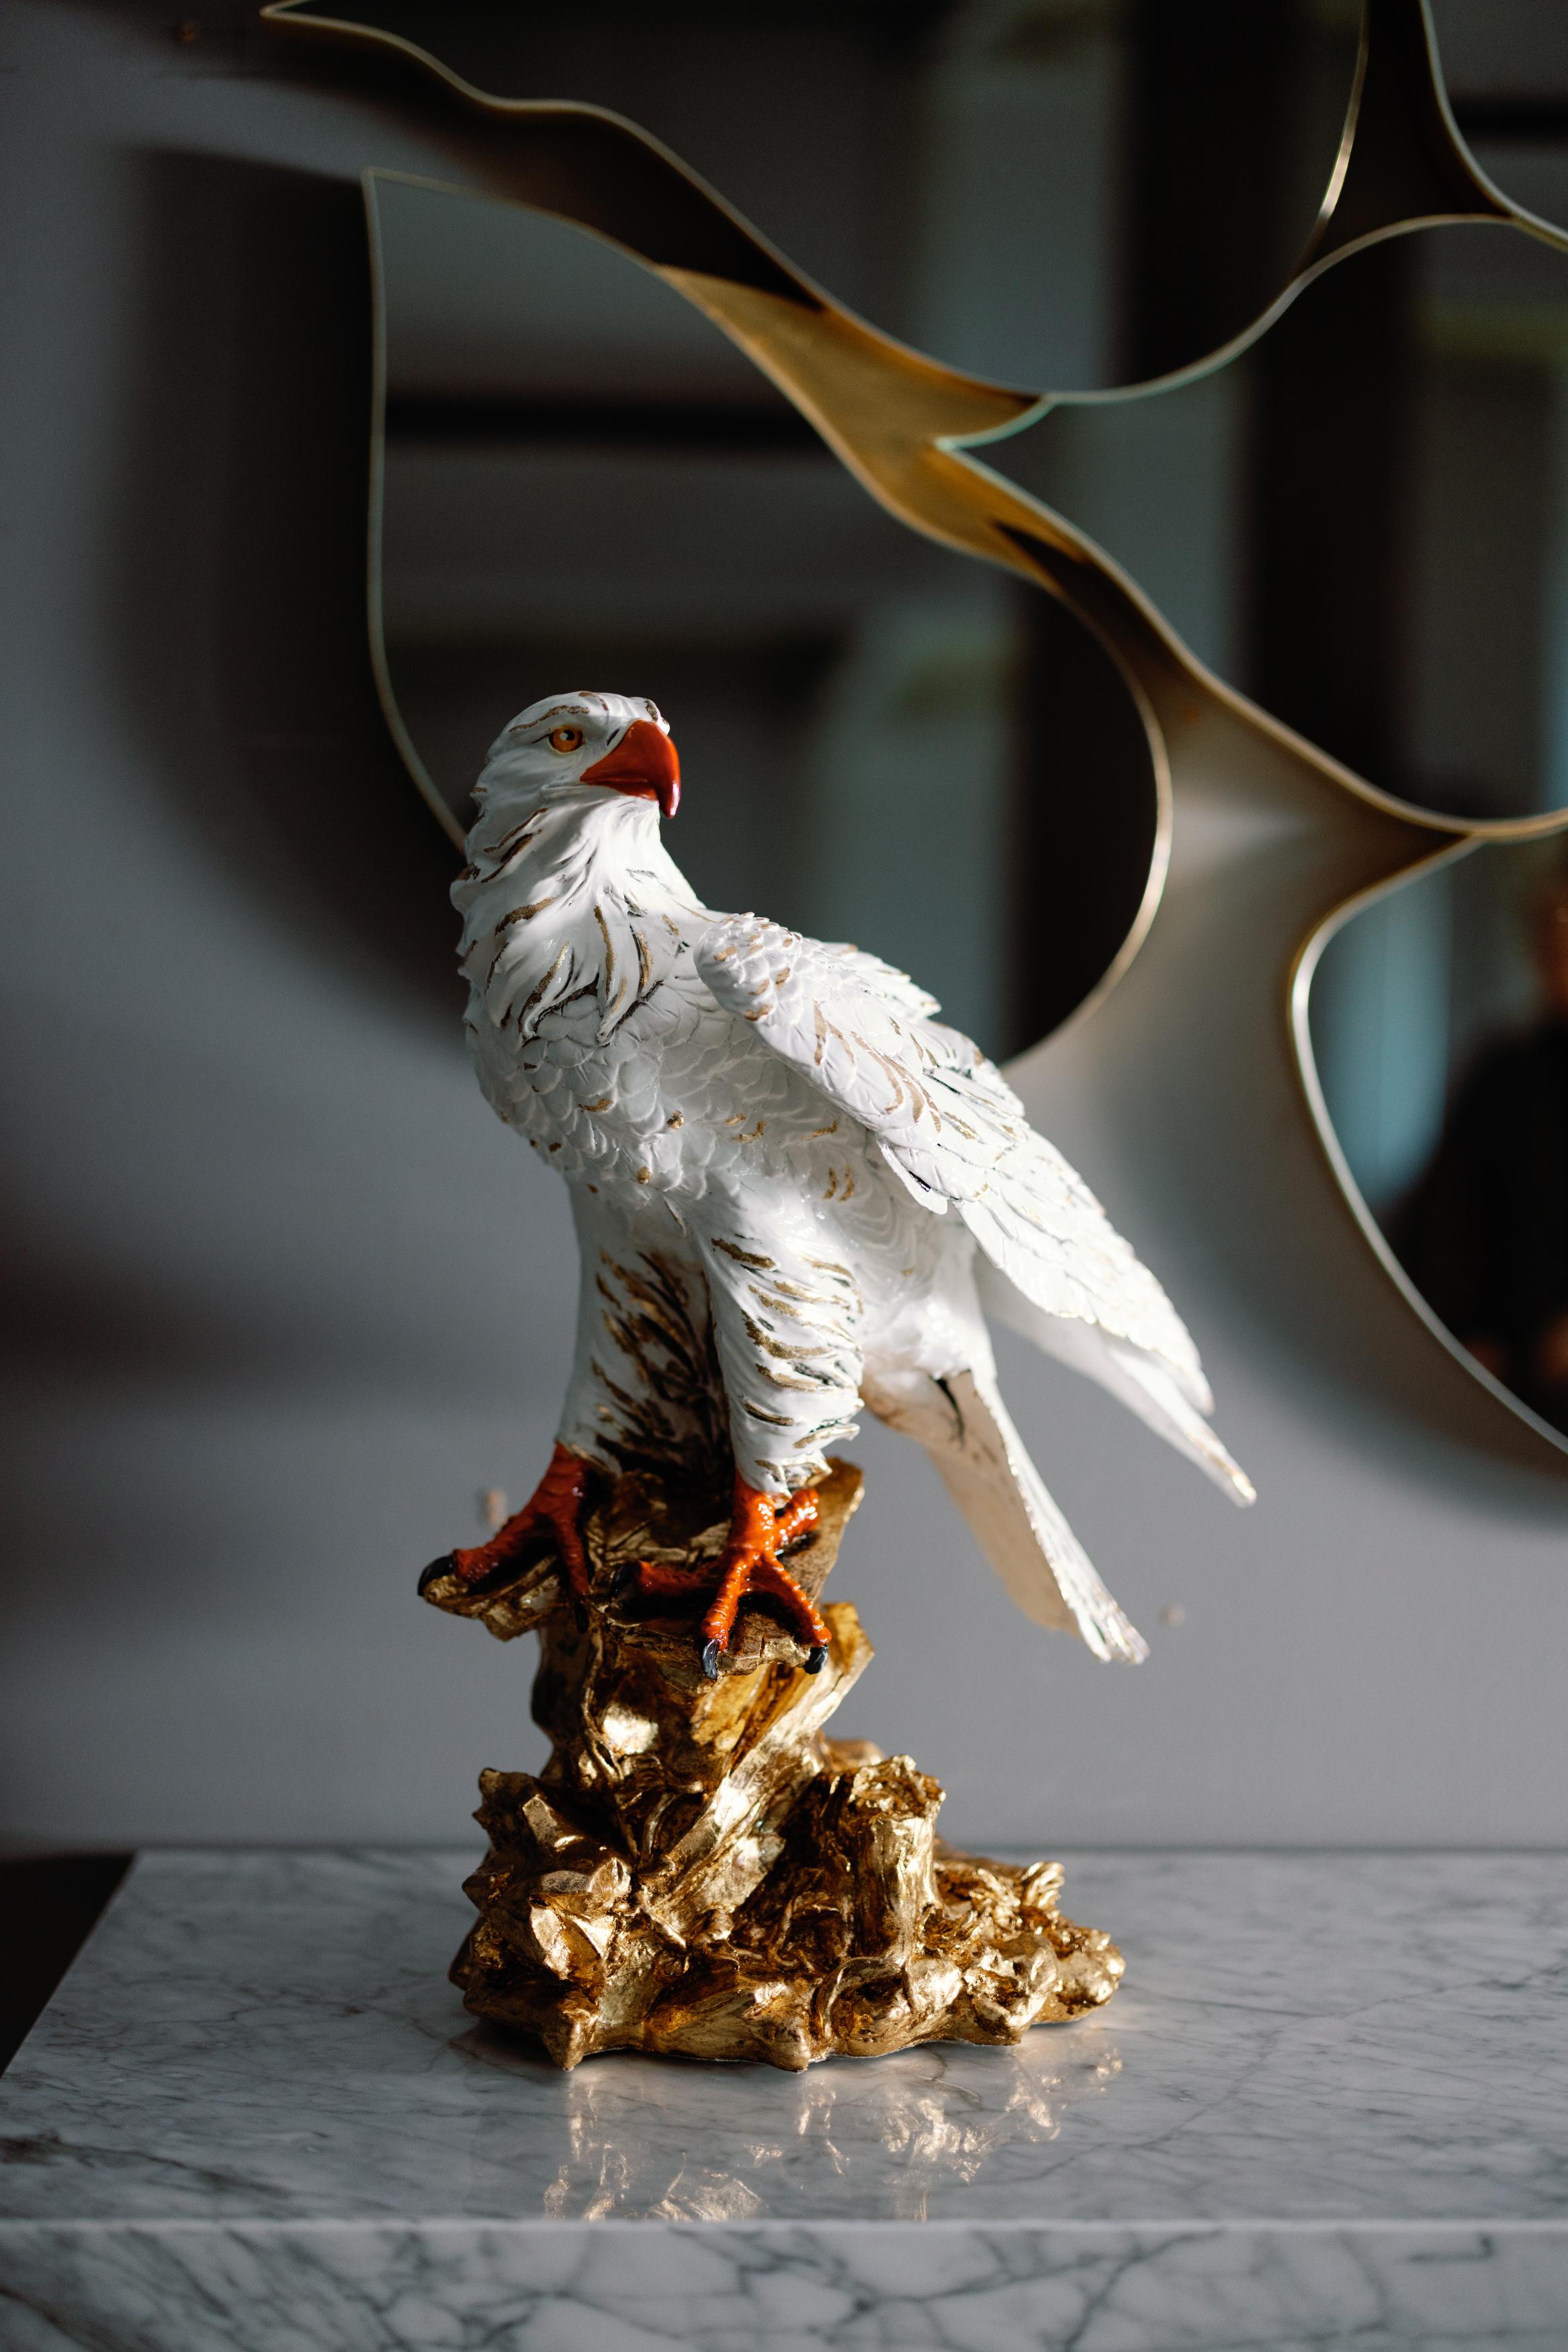 Resin Statue Eagle Imperial, Lusitanus Home Collection, by Lusitanus Home.

Decorative Eagle resin statue with hand-painted details and resin base in gold leaf applied by hand. Designed to be a unique sculpture piece standing in the room, Imperial